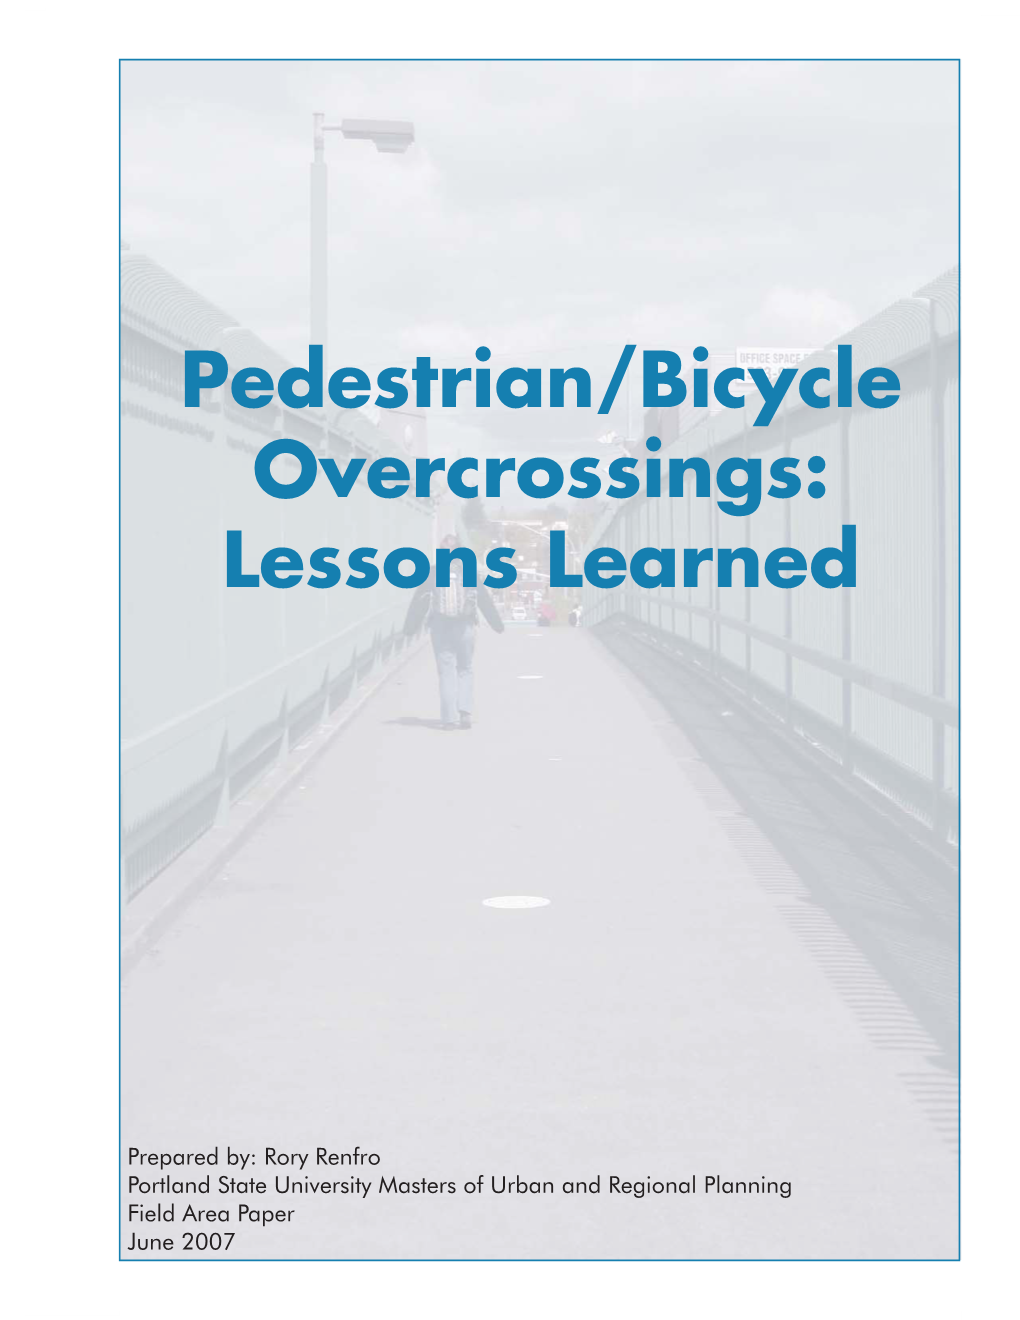 Pedestrian/Bicycle Overcrossings: Lessons Learned